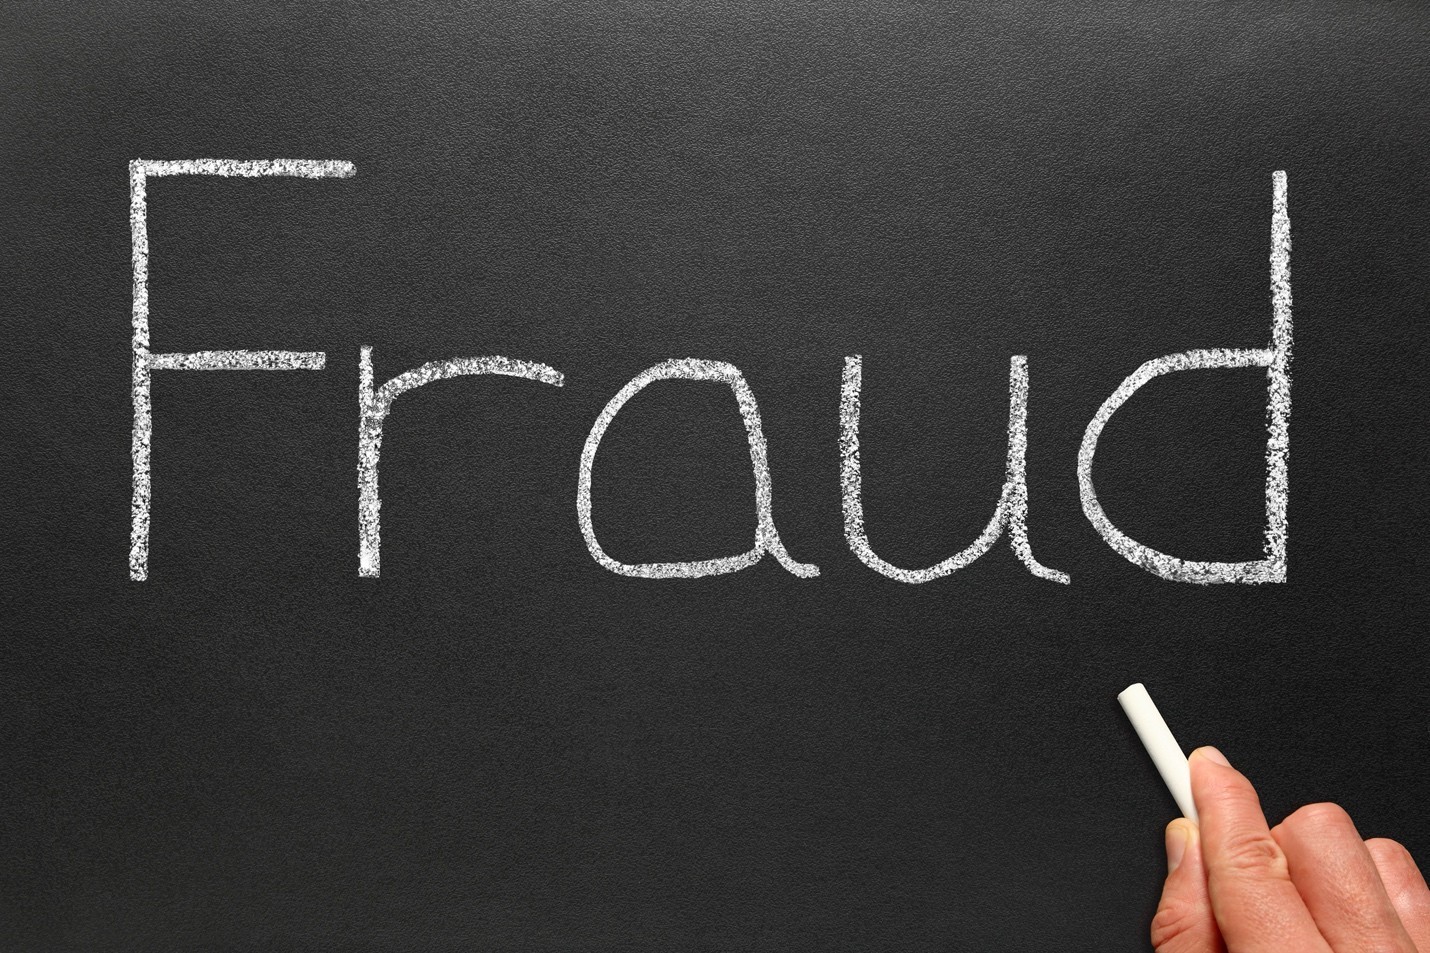 Private Investigators Assist Claims Adjusters in Solving Insurance Fraud Investigations